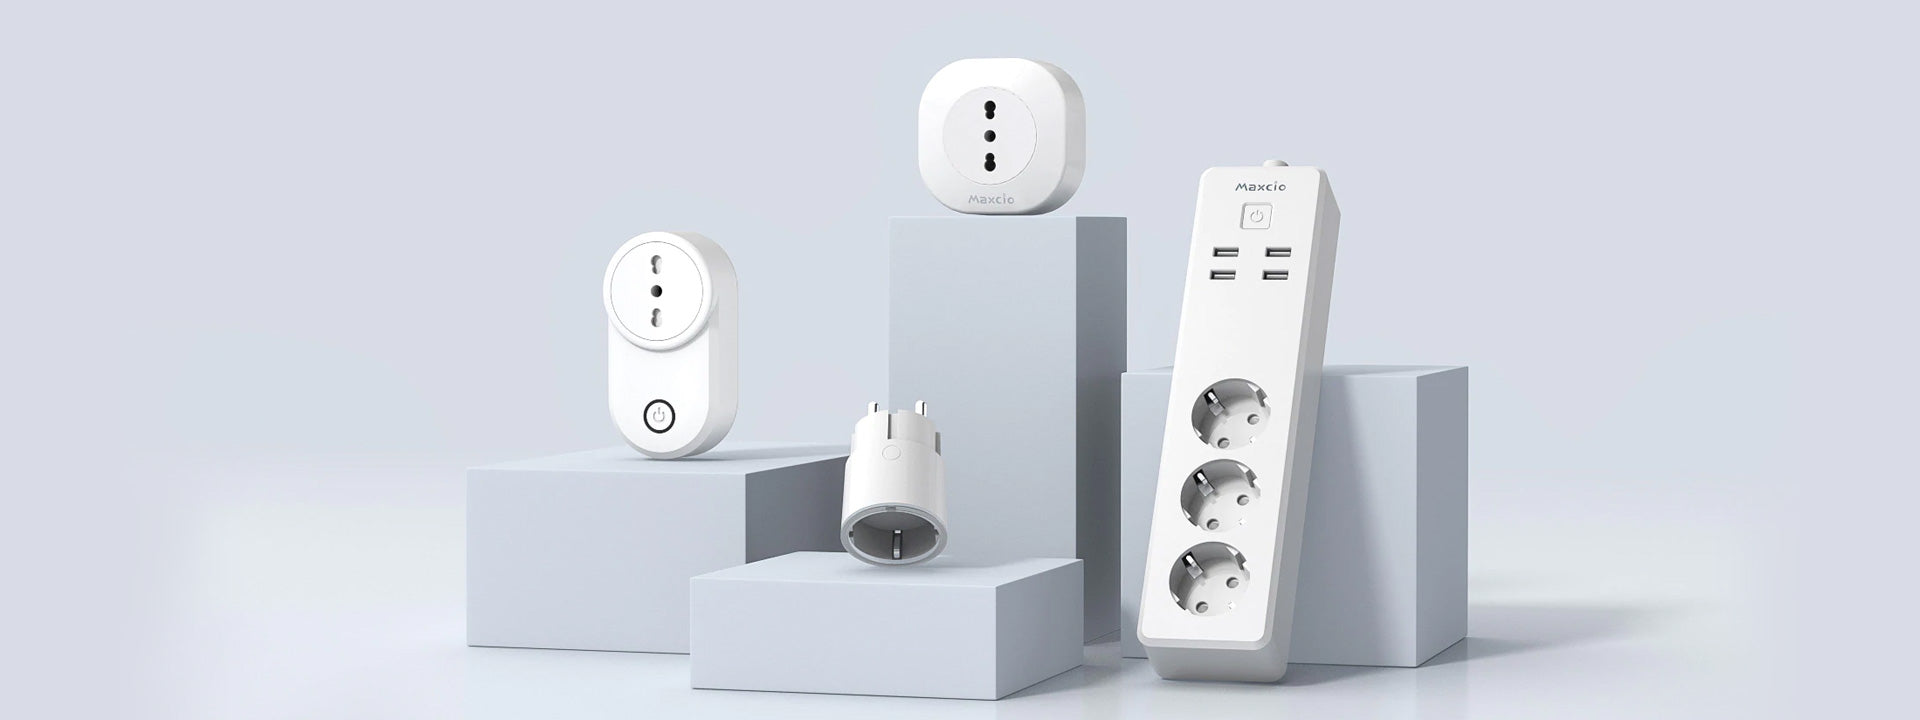 Etekcity Outdoor WiFi Outlet with 2 Sockets - Wireless Remote Control